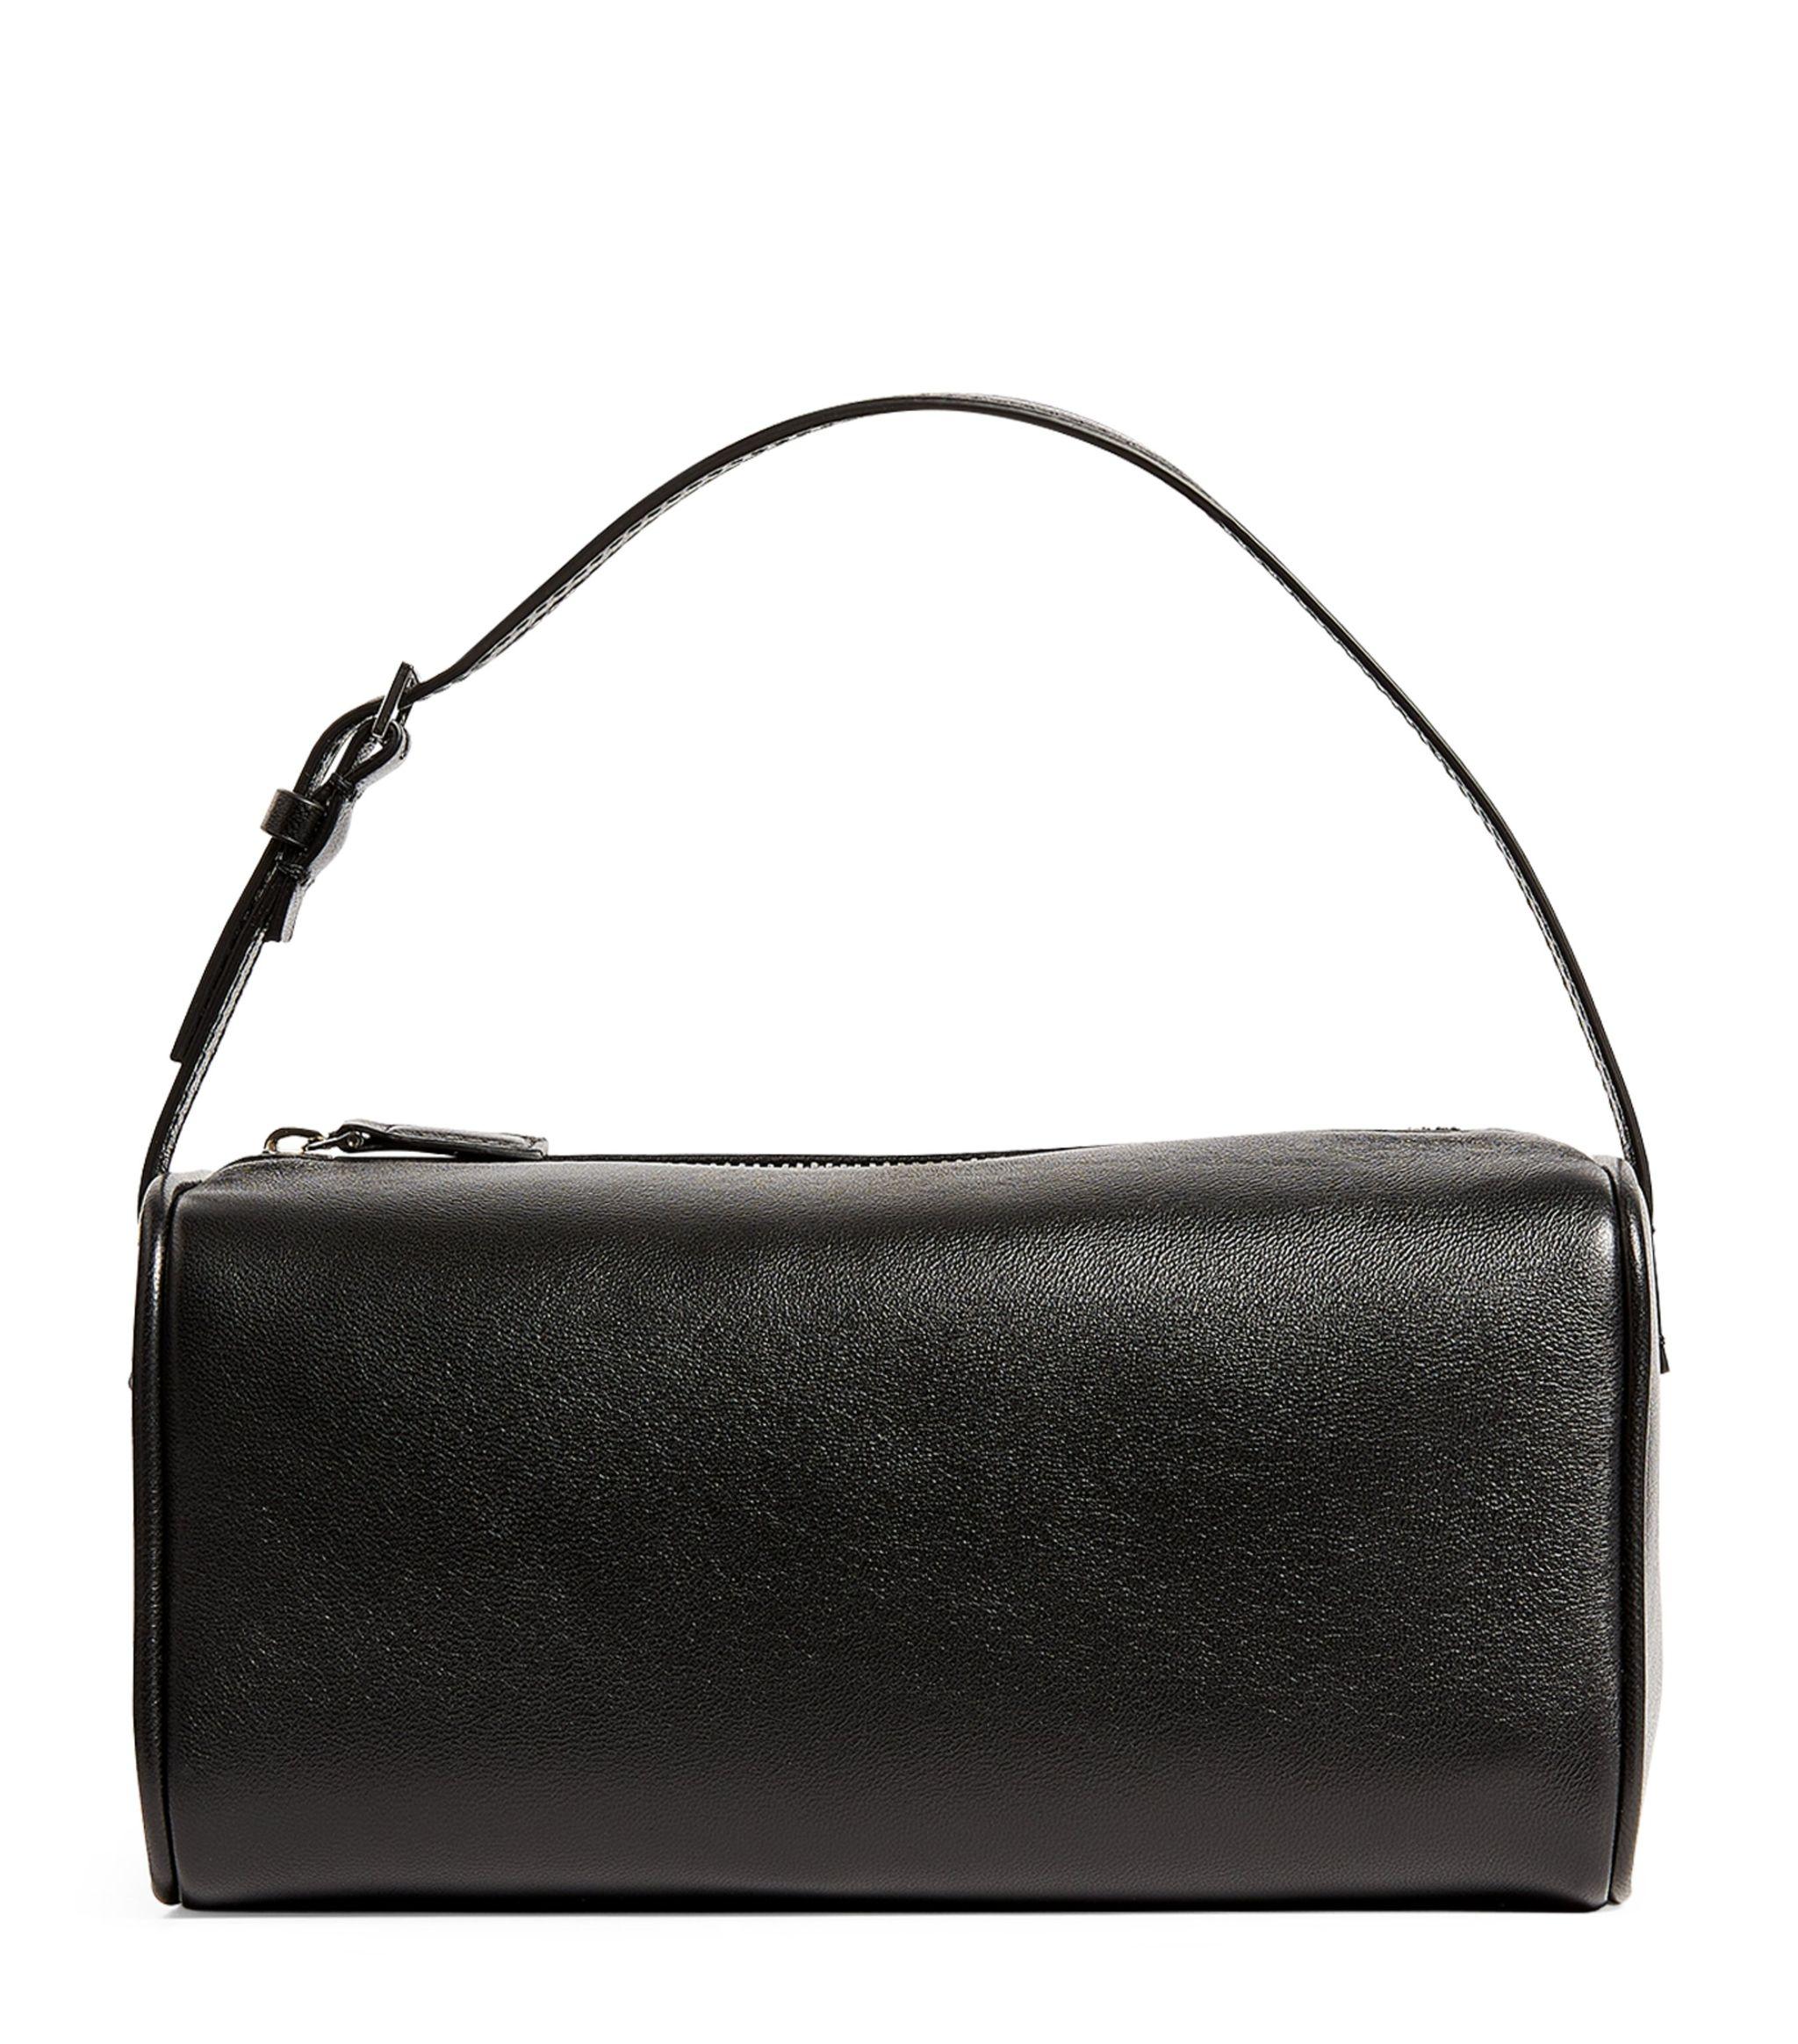 The Row Leather 90s Shoulder Bag in Black - Lyst